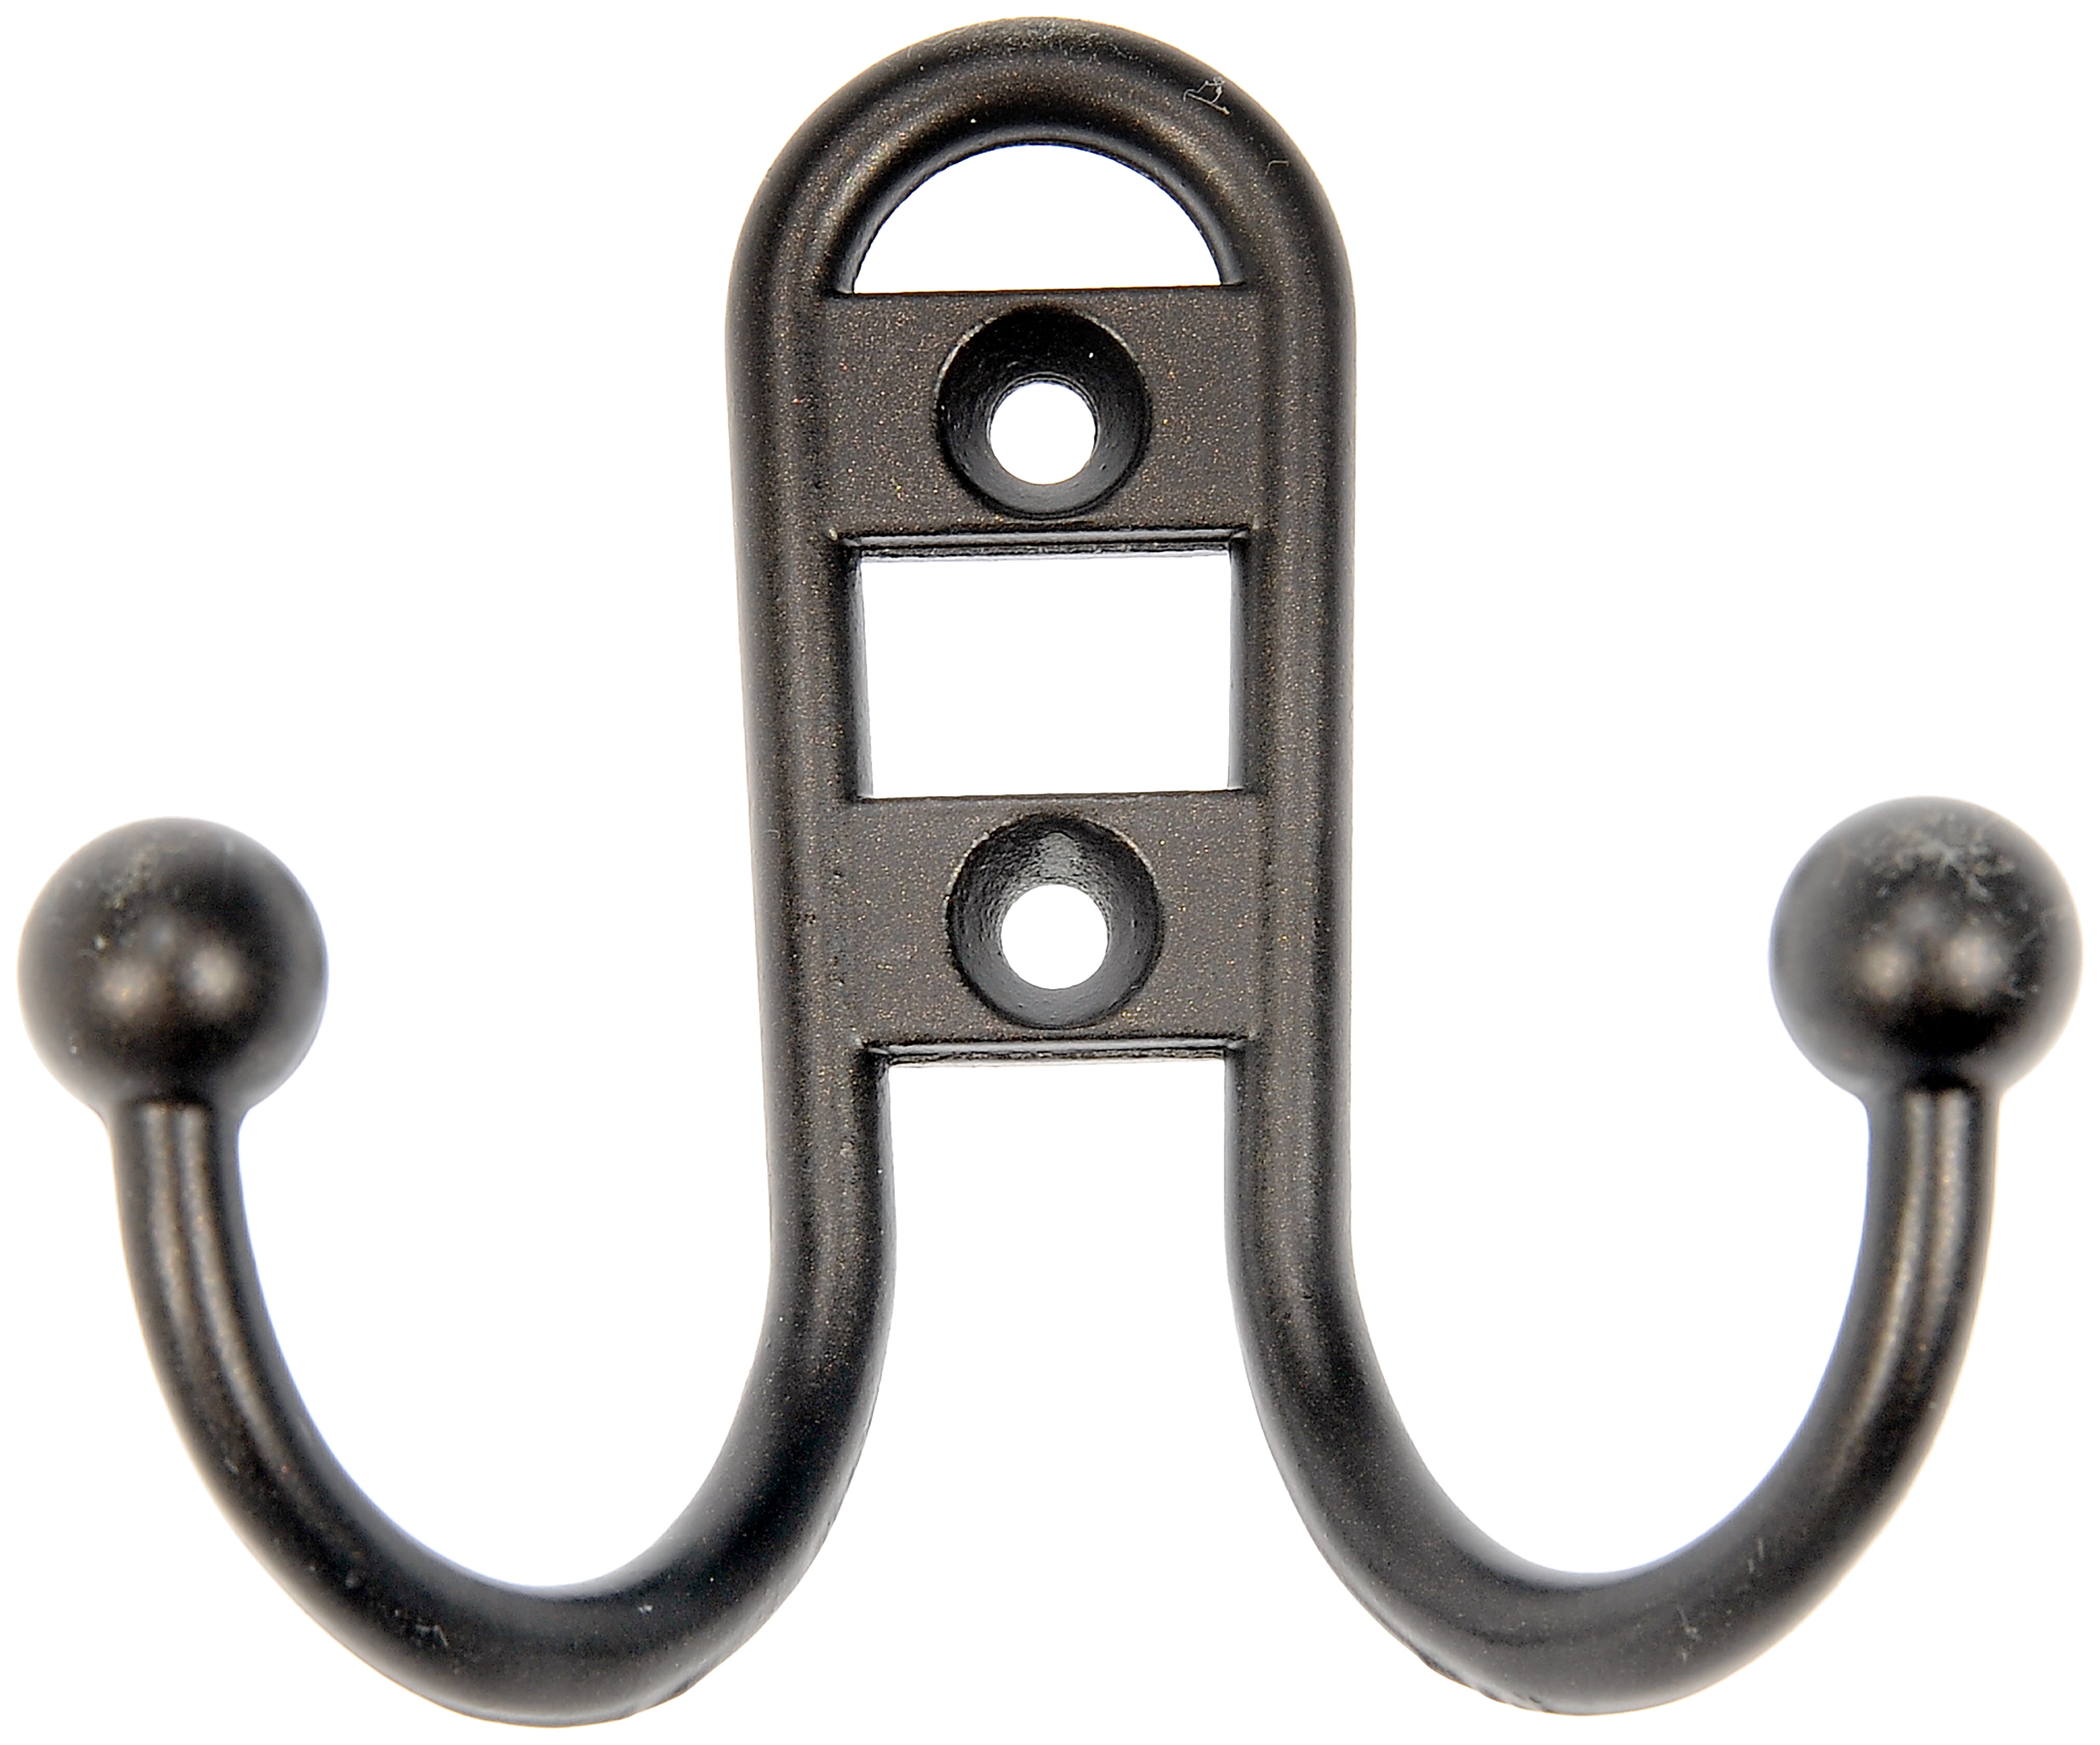 Mainstays, Double Hook Bronze Hook, 3 Pack, Mounting Hardware Included, 10 lb Working Limit